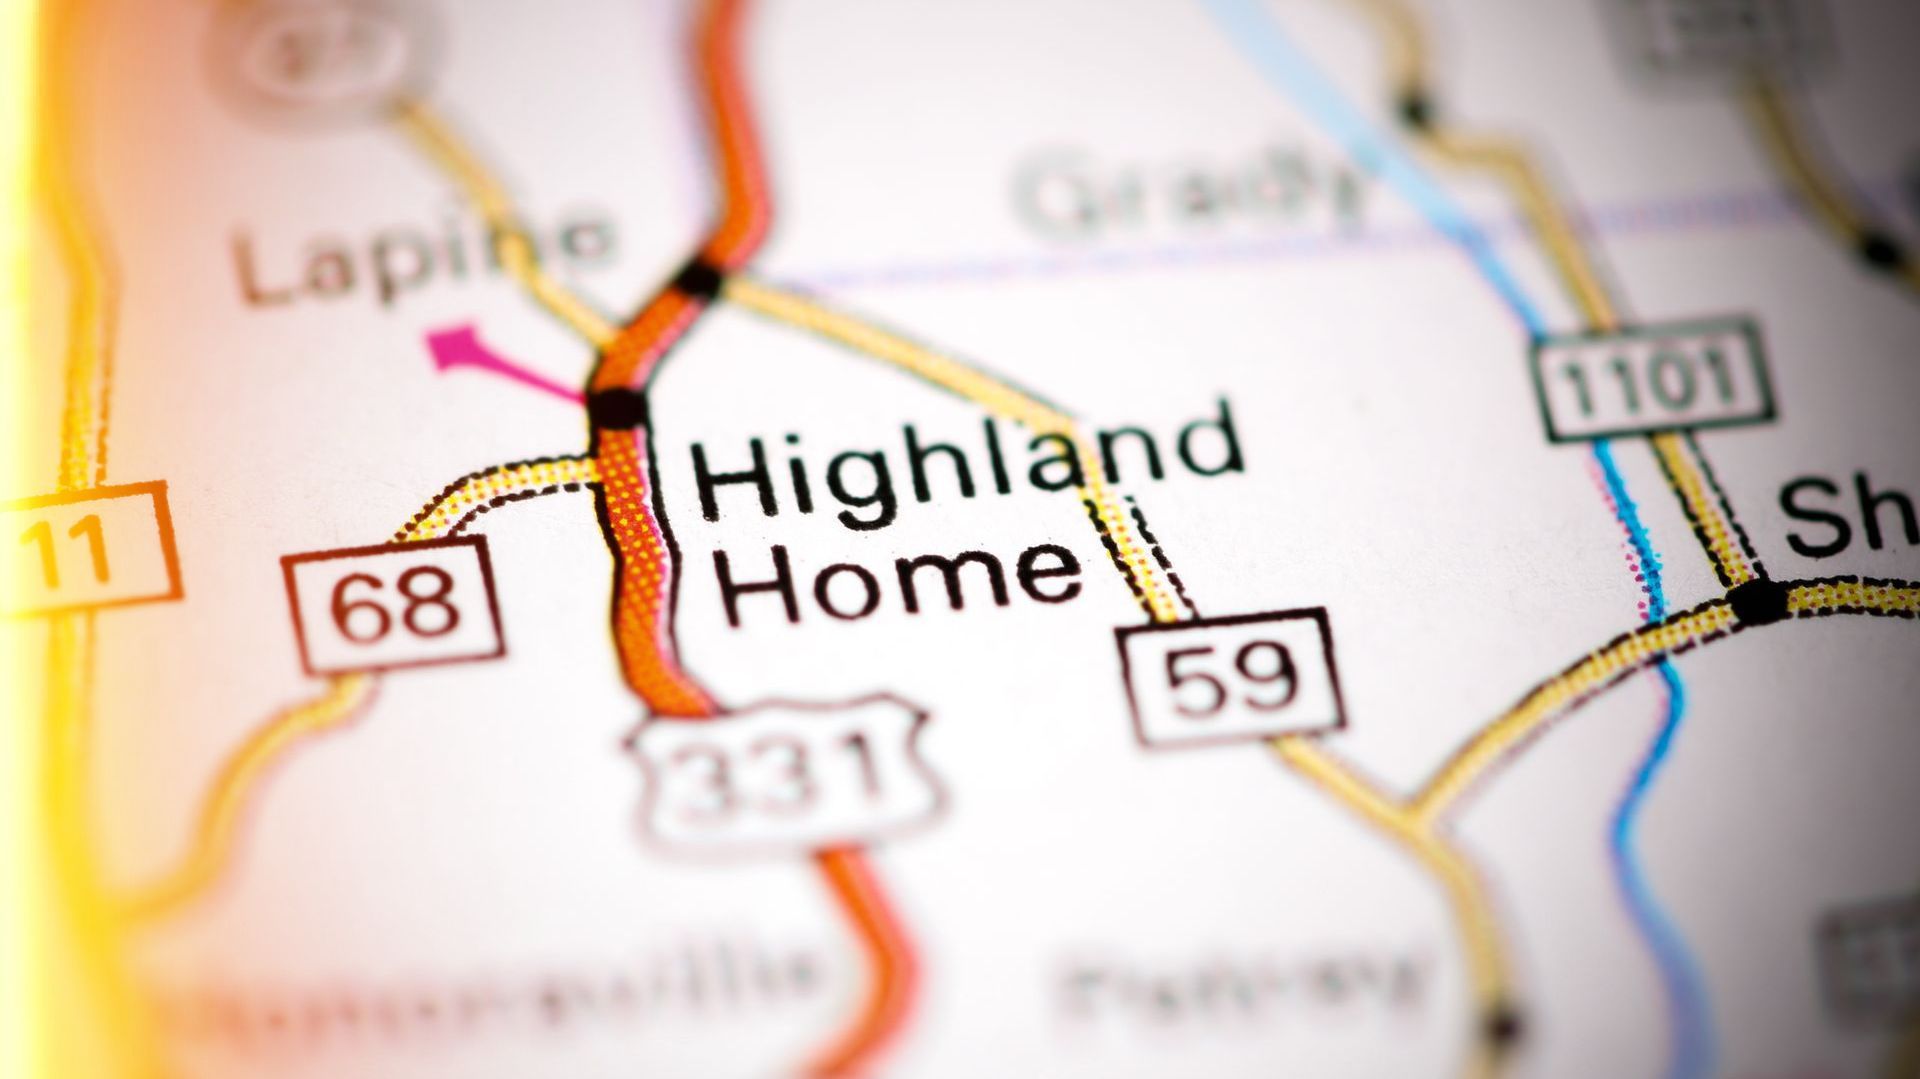 Highland Home Homebuying: Insights and Advice from Jaco Sales